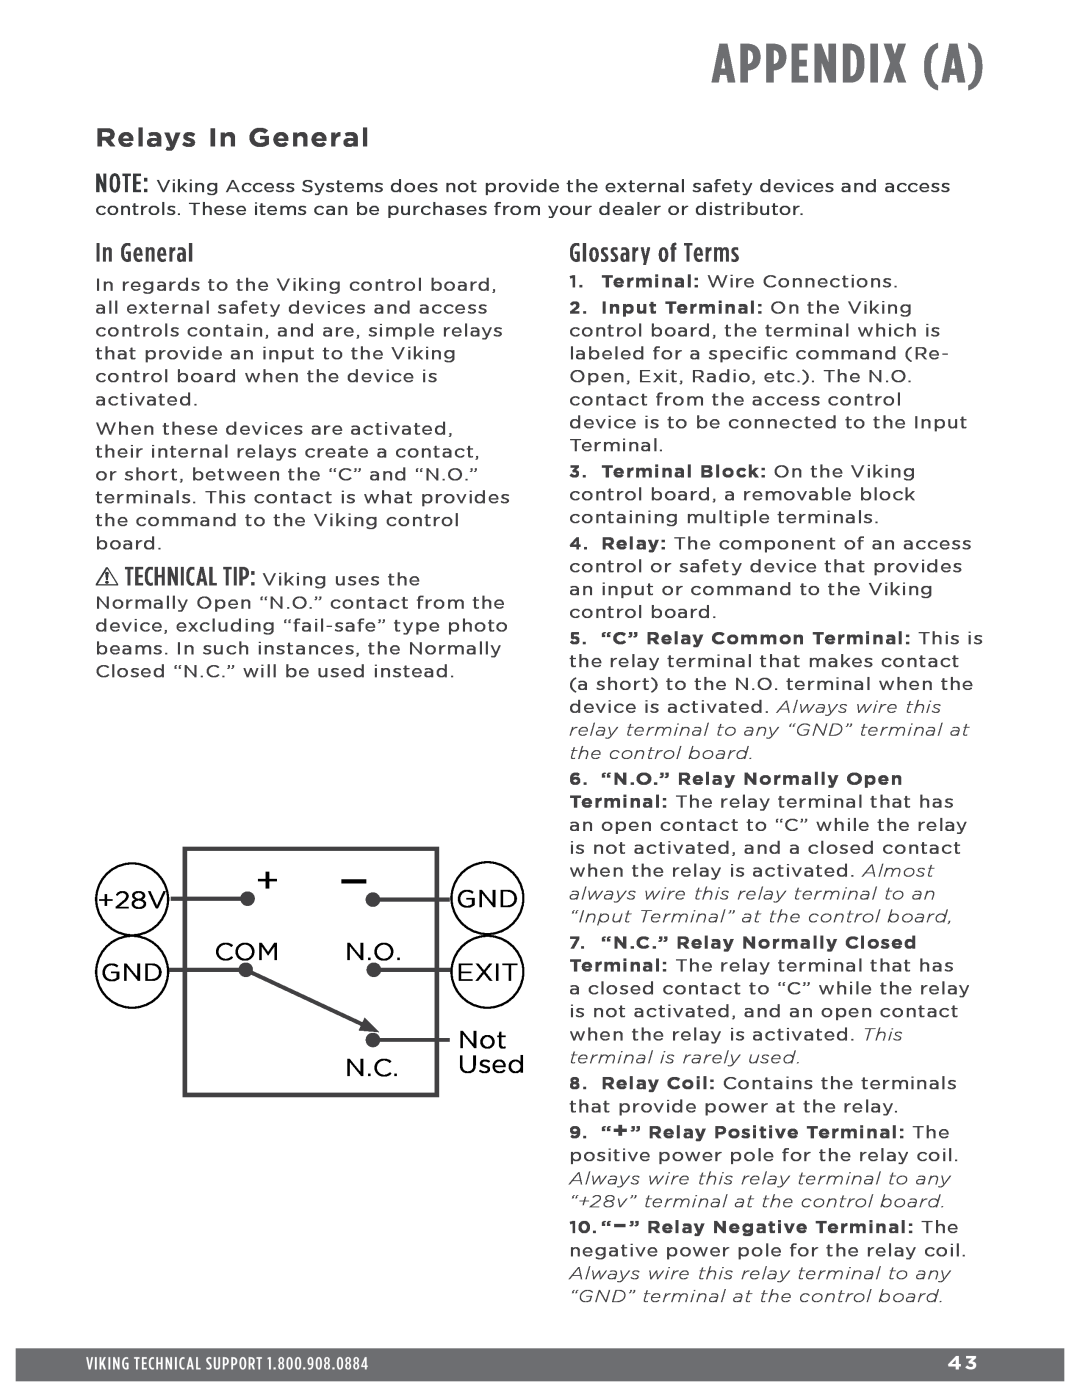 Viking Access Systems Q7 manual Appendix A, Relays In General, TECHNICAL TIP Viking uses the, Glossary of Terms 